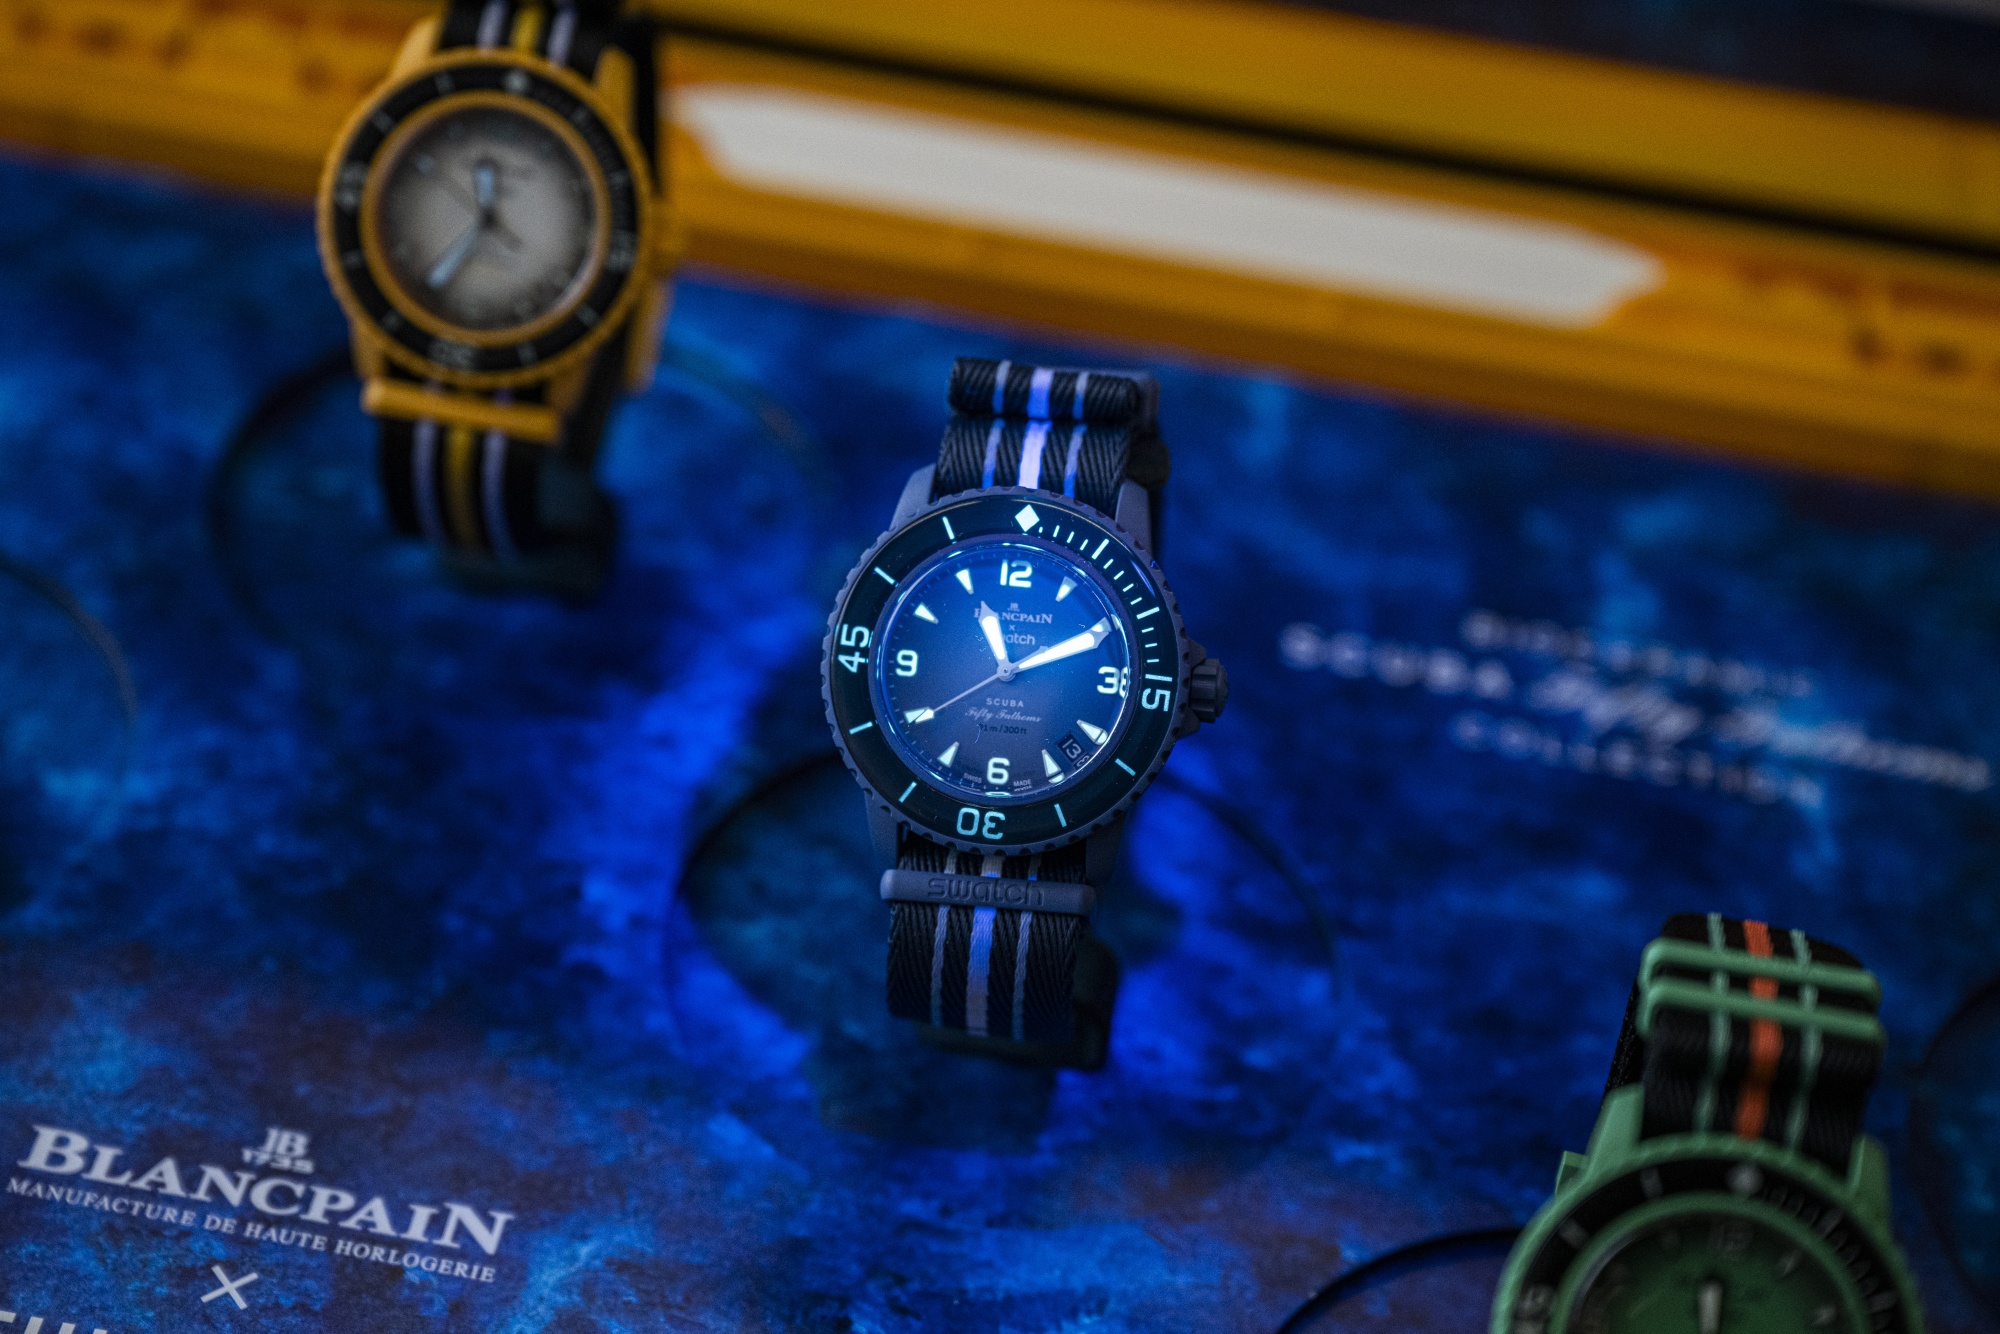 The 11 most dazzling watches to celebrate the Chinese New Year of the Ox